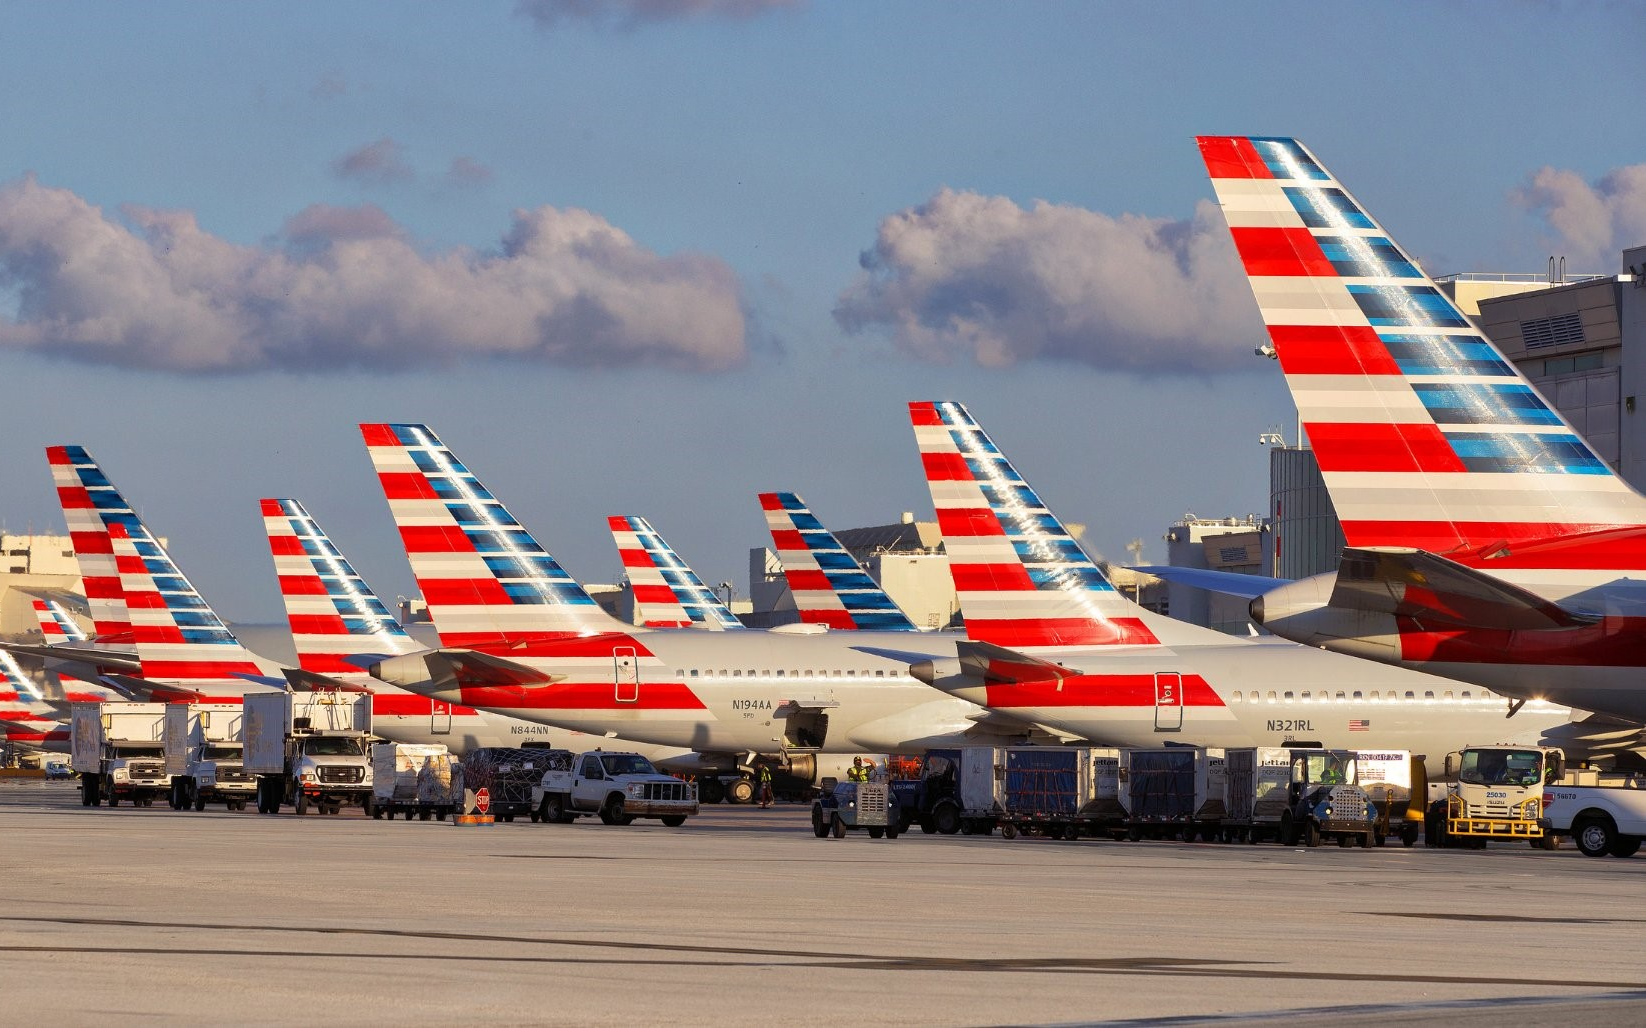 American airlines are expanding its offering to Latin America